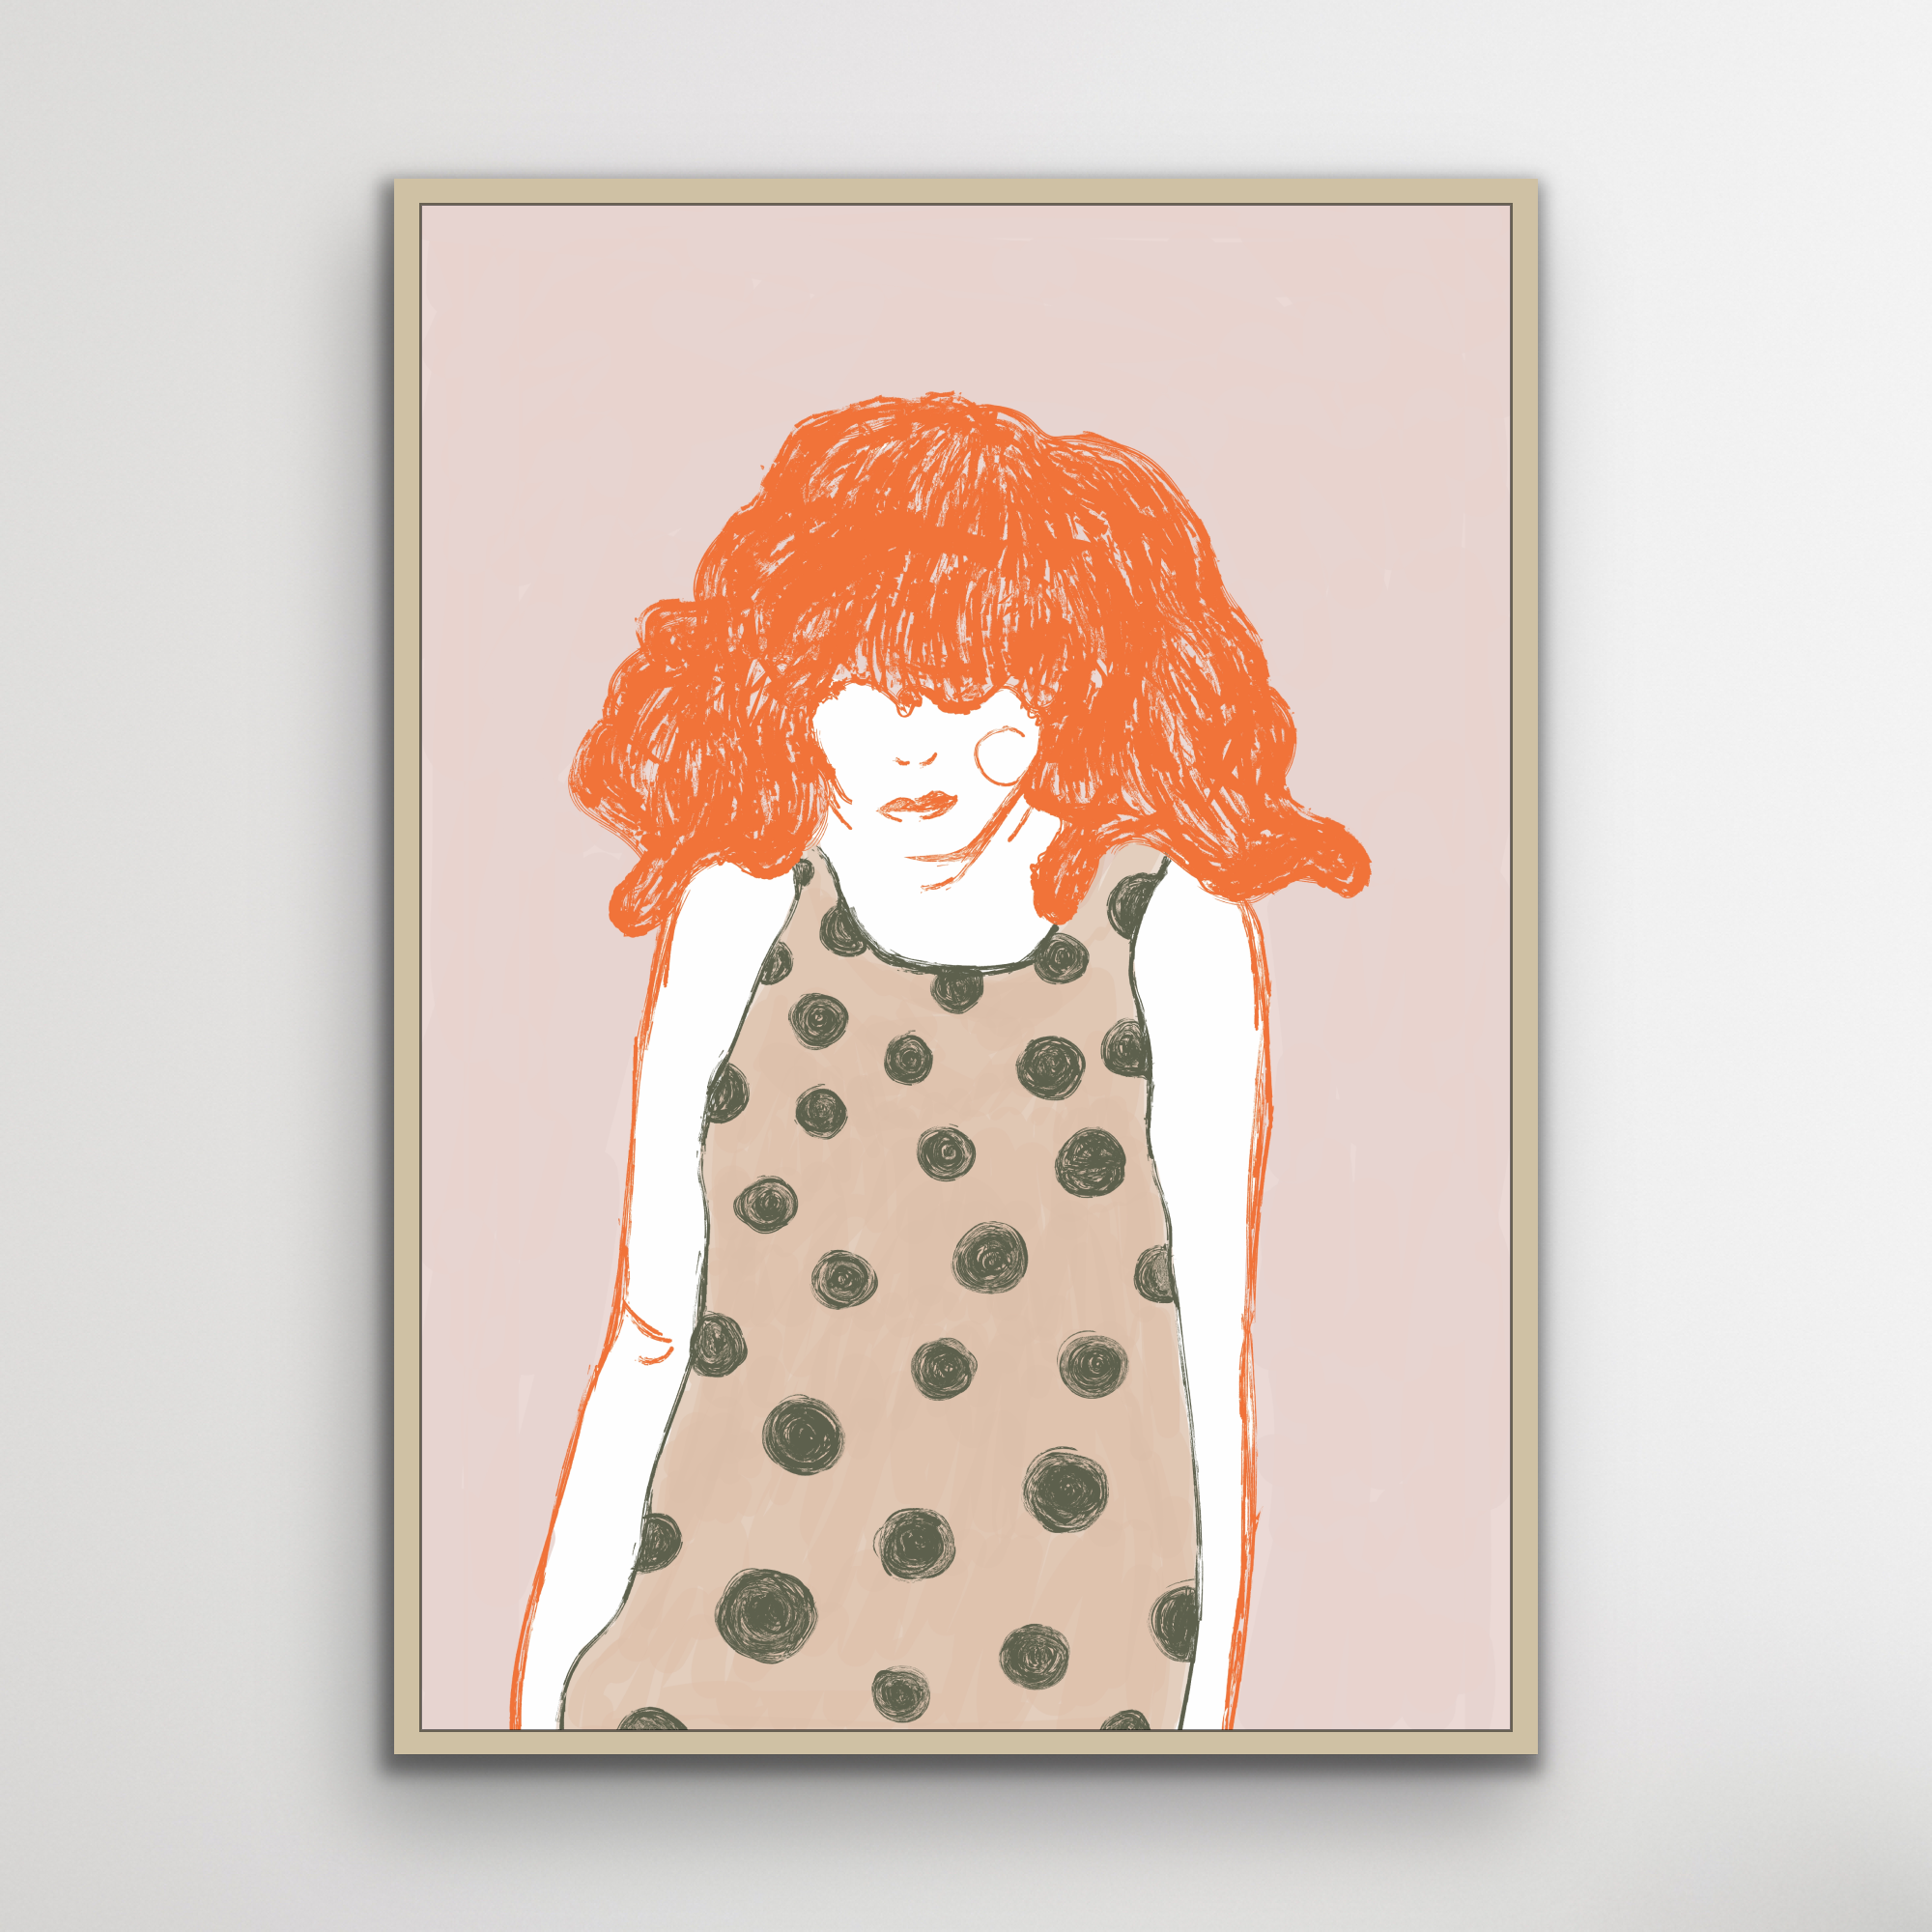 Poster: "The Red Head"